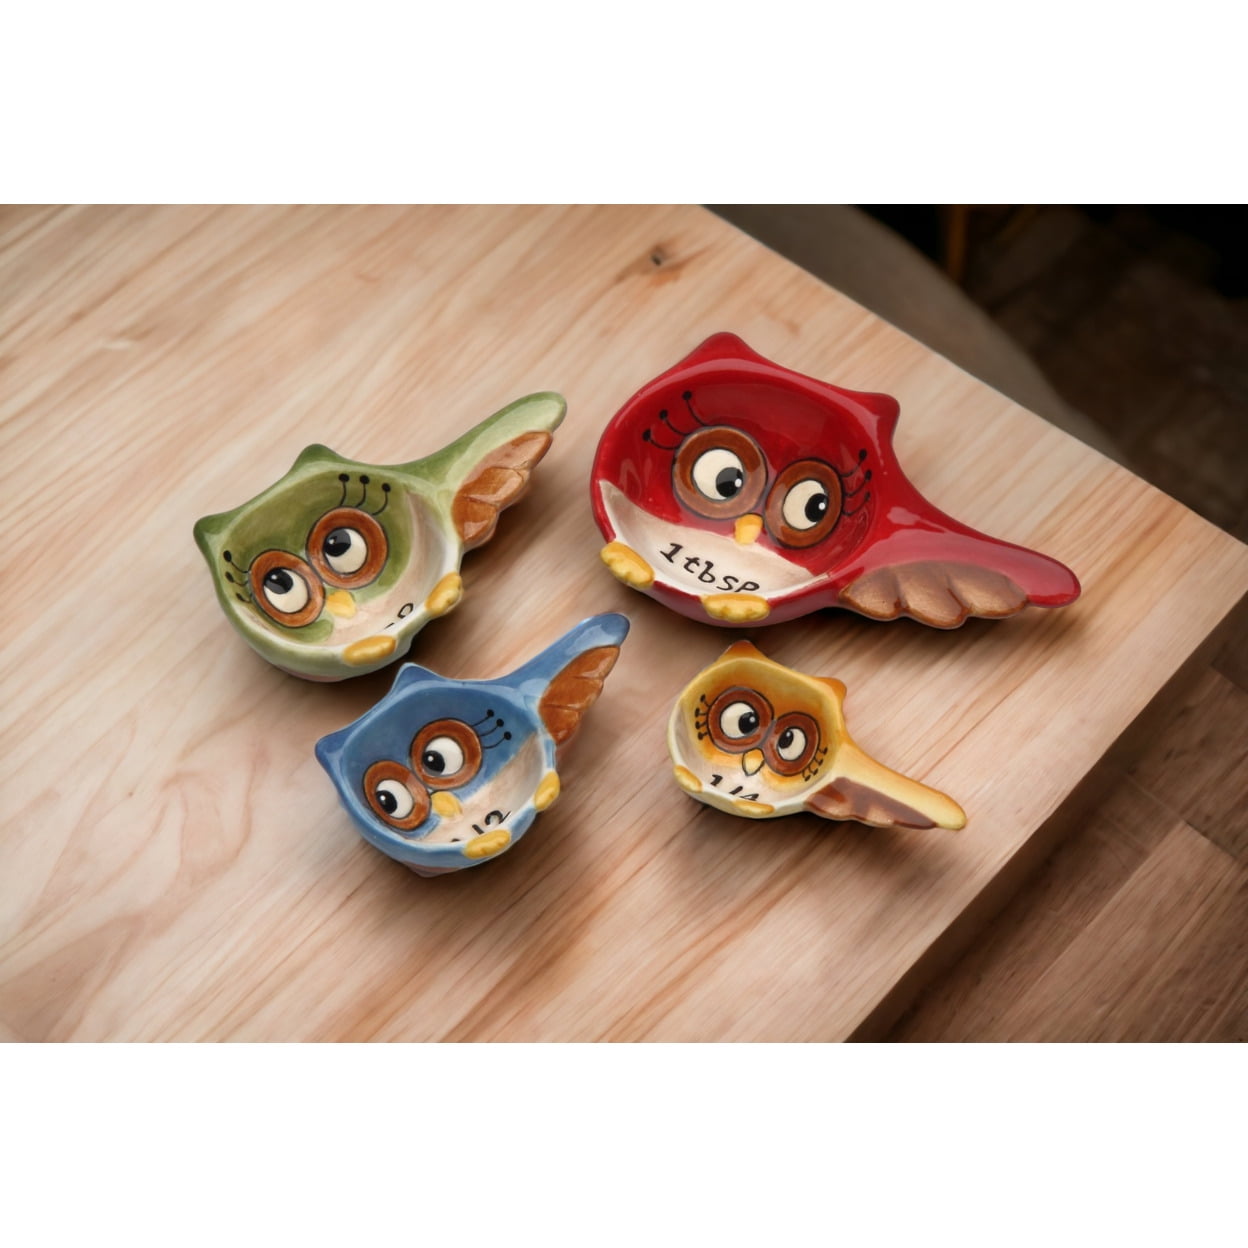 NEW!! Shelly Cute Measuring Cups and Spoons Set by OTOTO, Measuring Spoons  and Cups Set, Snails Cooking Gadgets, Funny Gifts, Cute Kitchen